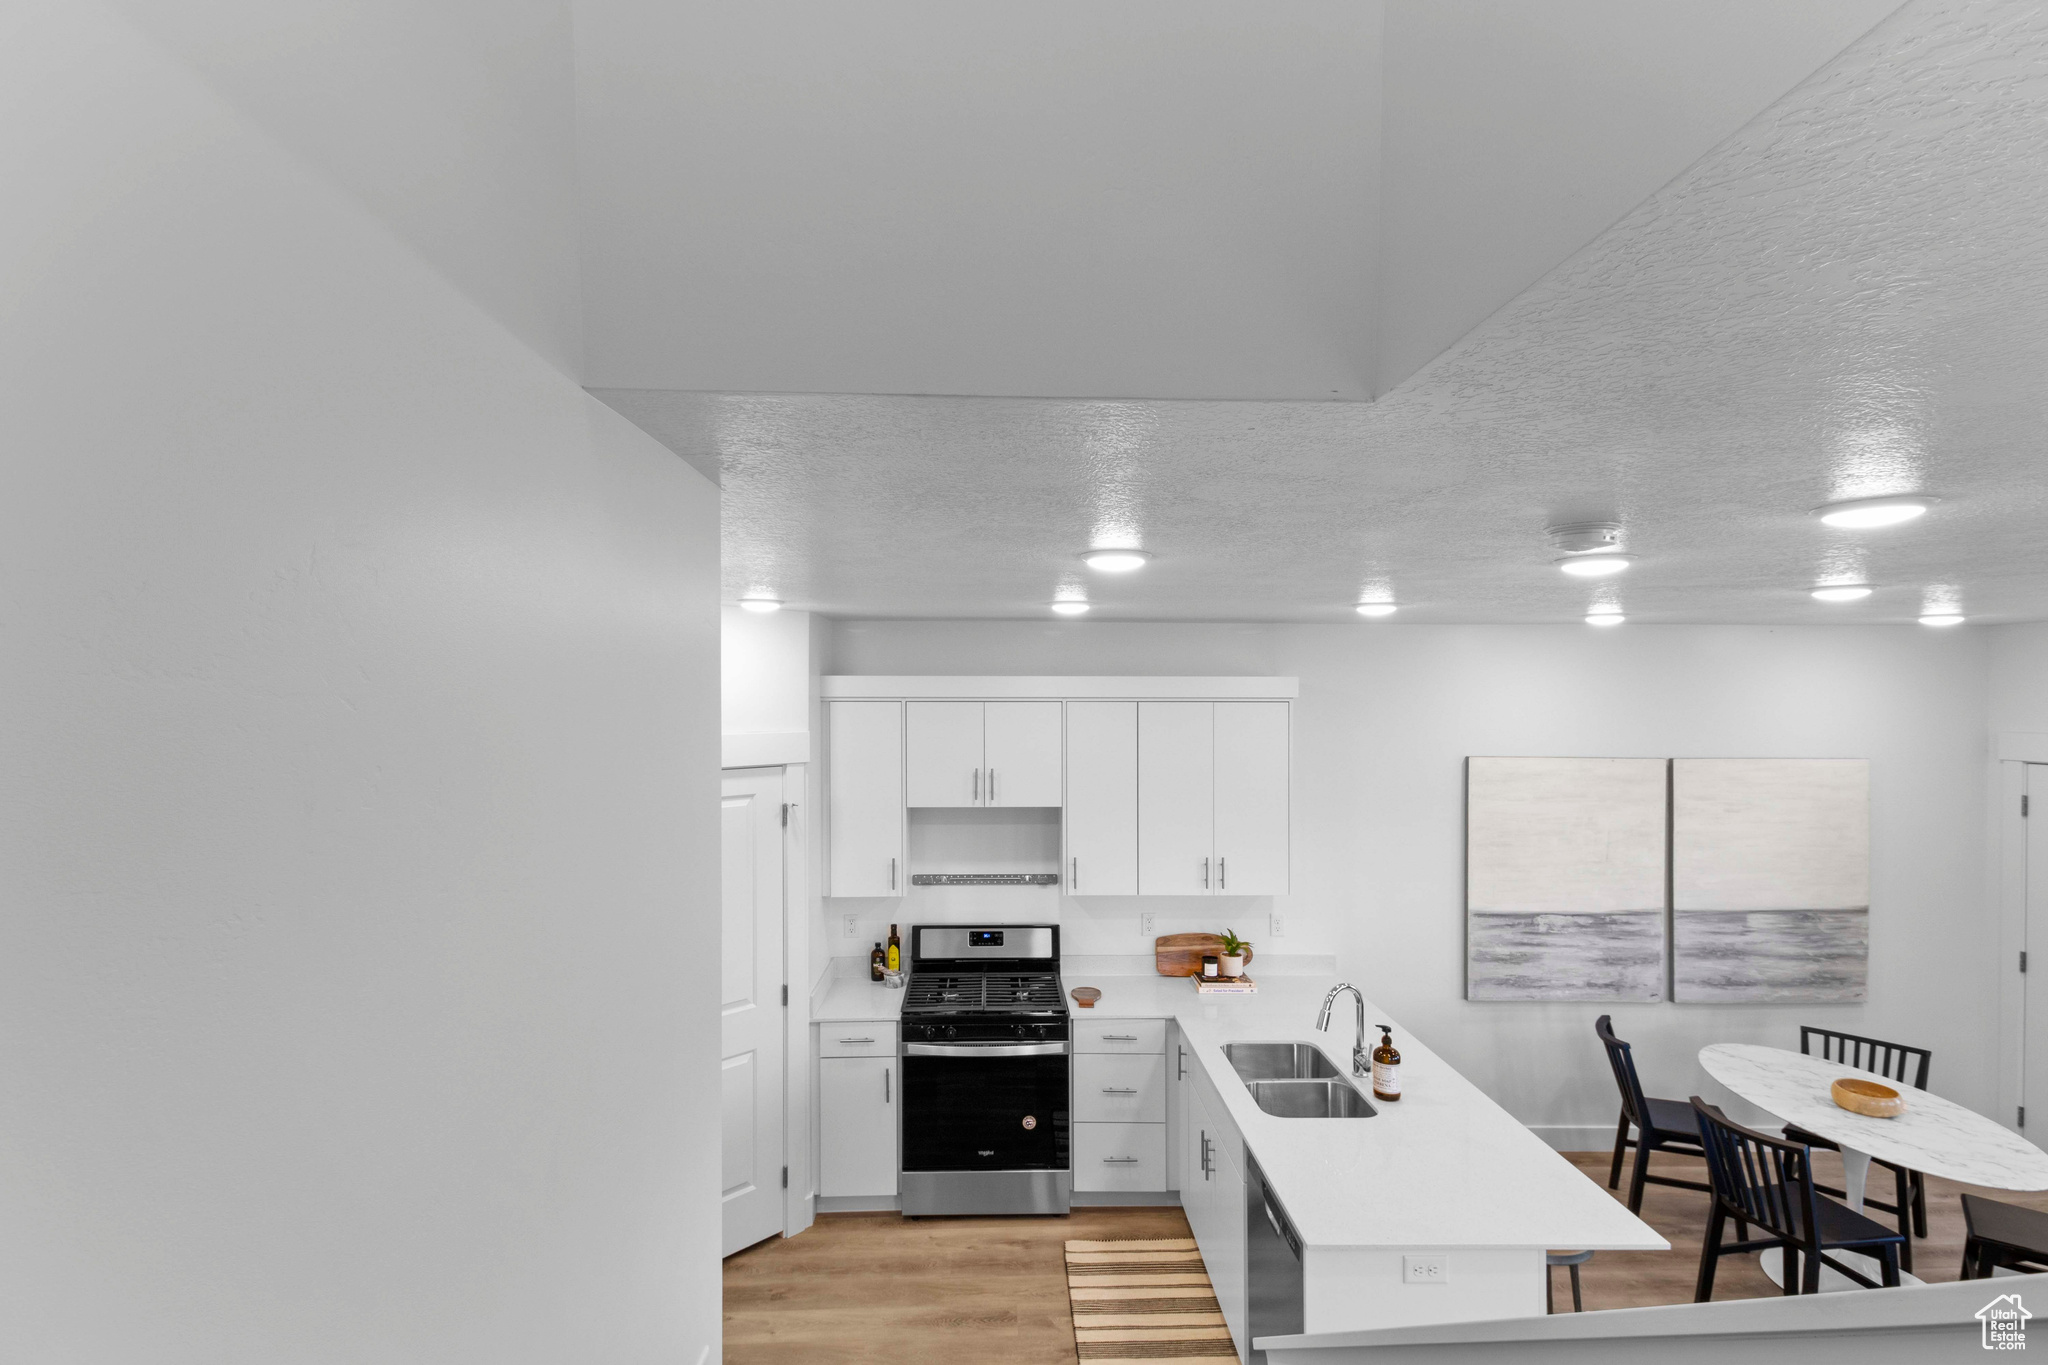 Kitchen featuring light hardwood / wood-style floors, a textured ceiling, stainless steel electric stove, white cabinetry, and sink